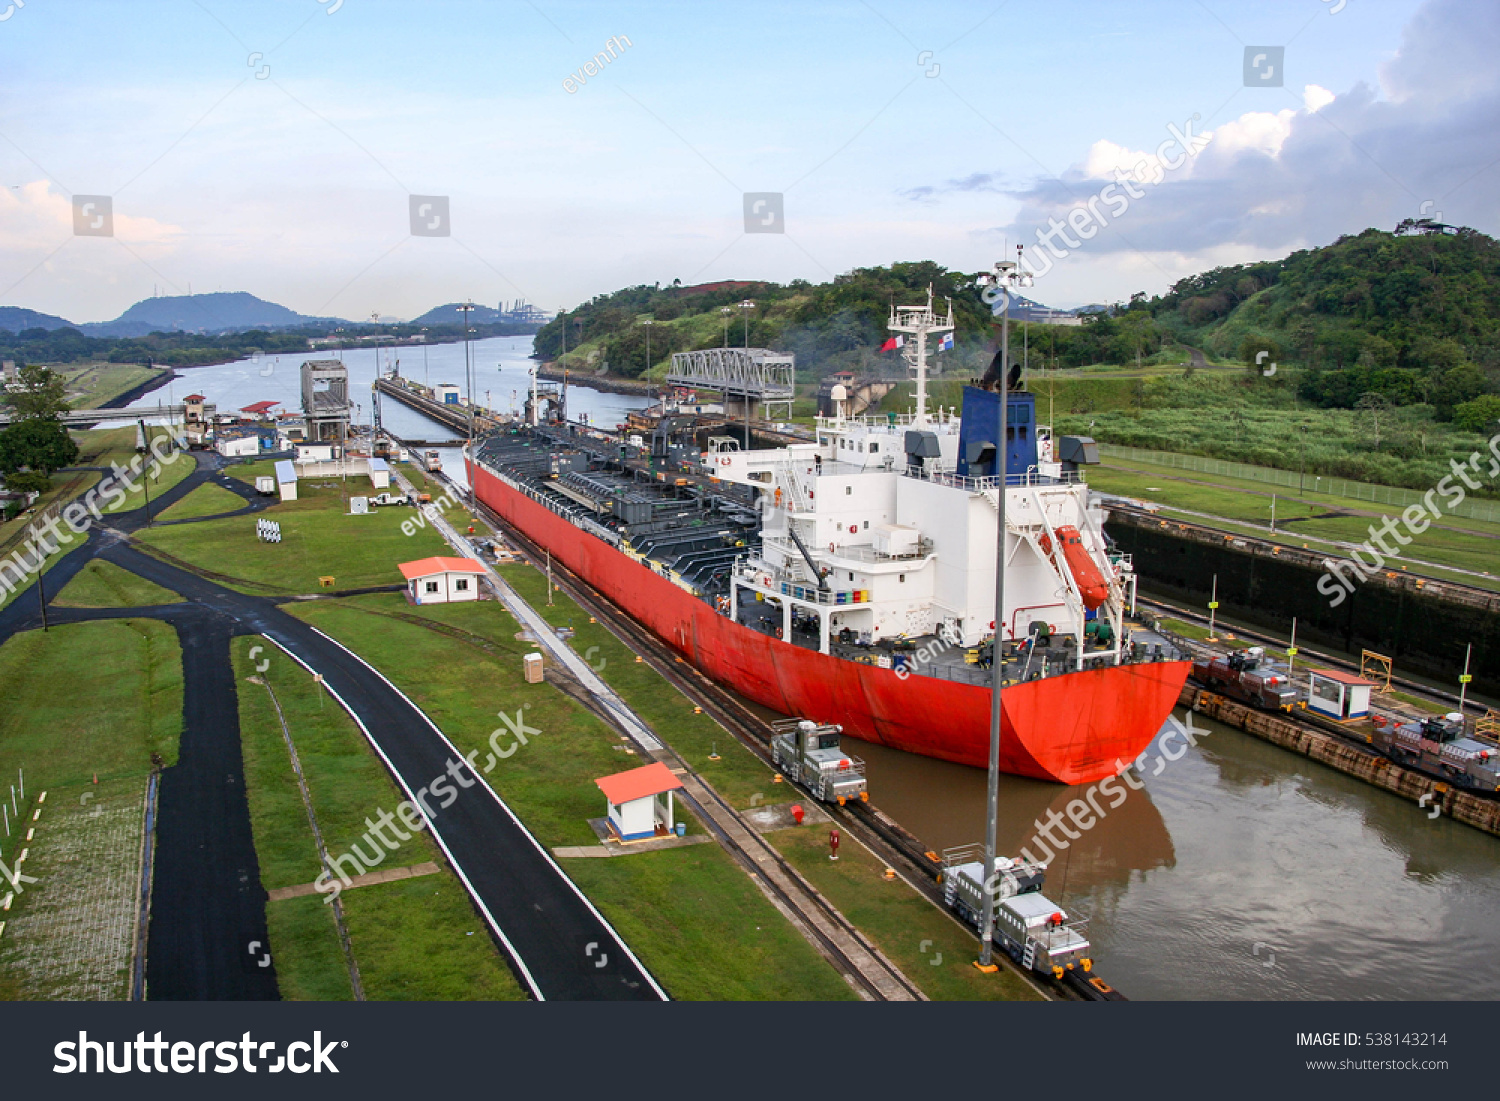 The Panama Canal is an artificial 48-mile (77 km) waterway in Panama that connects the Atlantic Ocean with the Pacific Ocean. #538143214